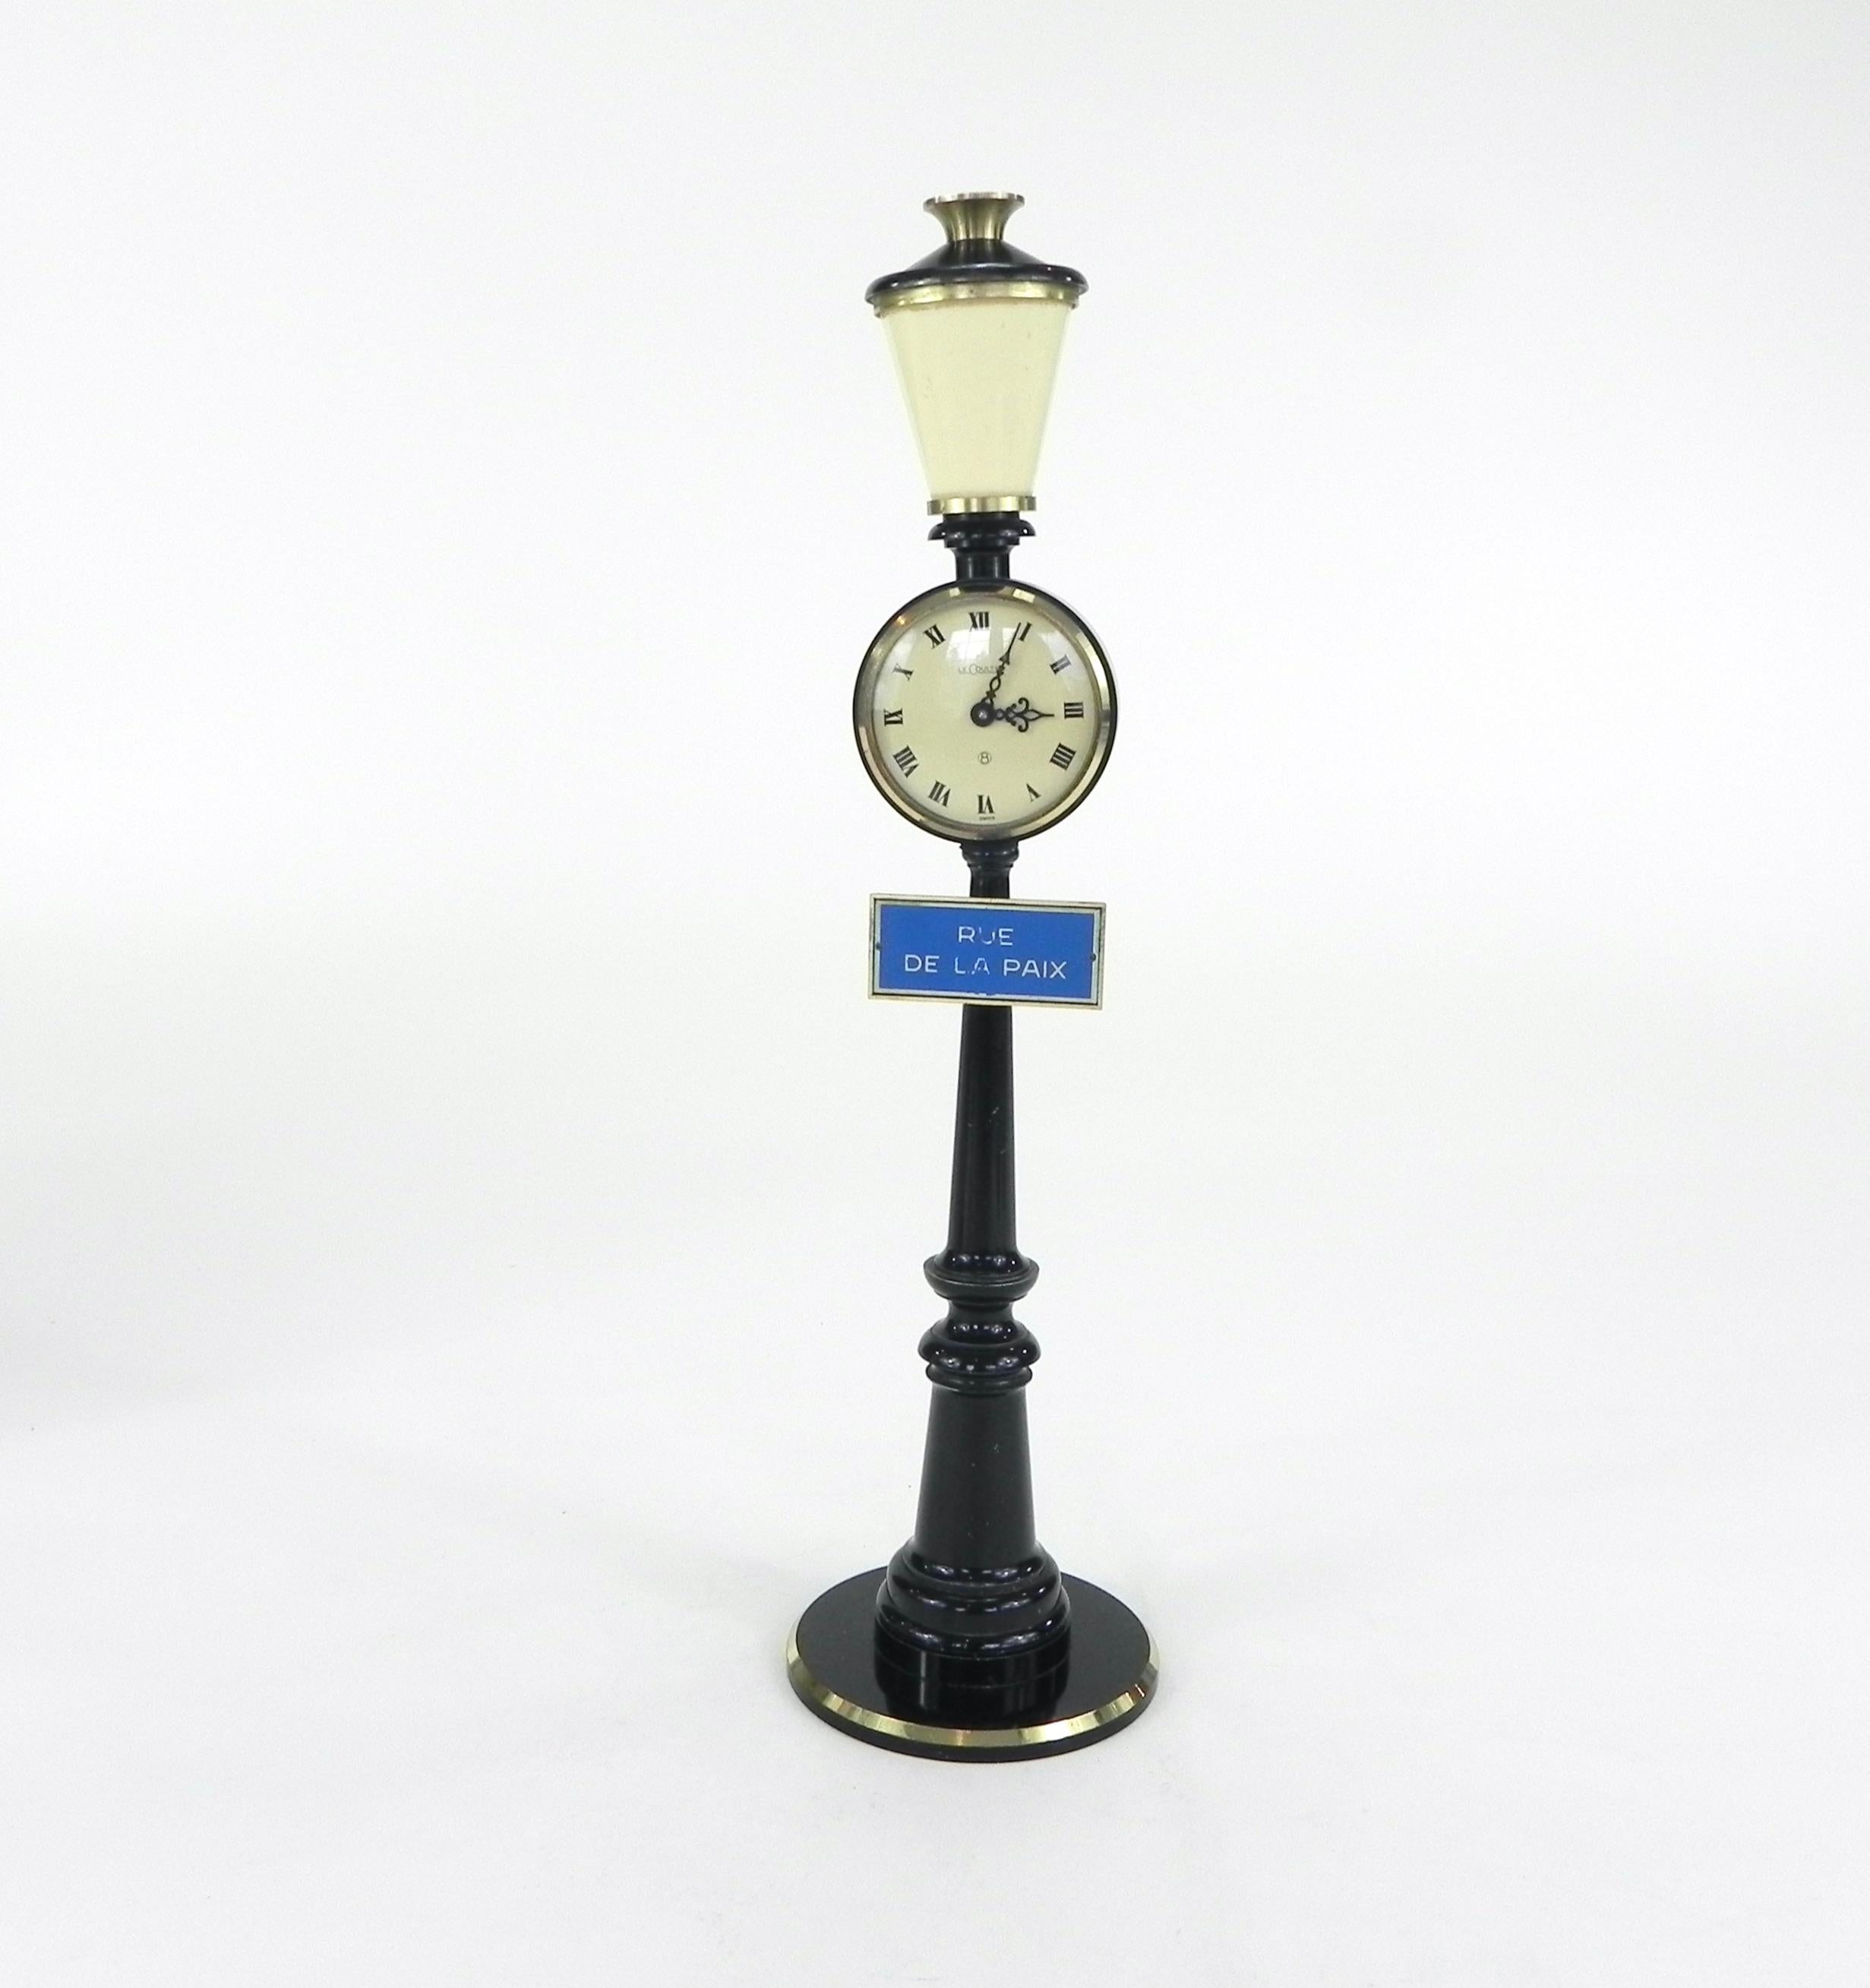 Beautiful vintage Jaeger Le Coultre figural miniature street lamp clock for table top or desktop. It has been tested and it is working.

This clock is in very good condition with minimal to no visible wear. Only the sign 